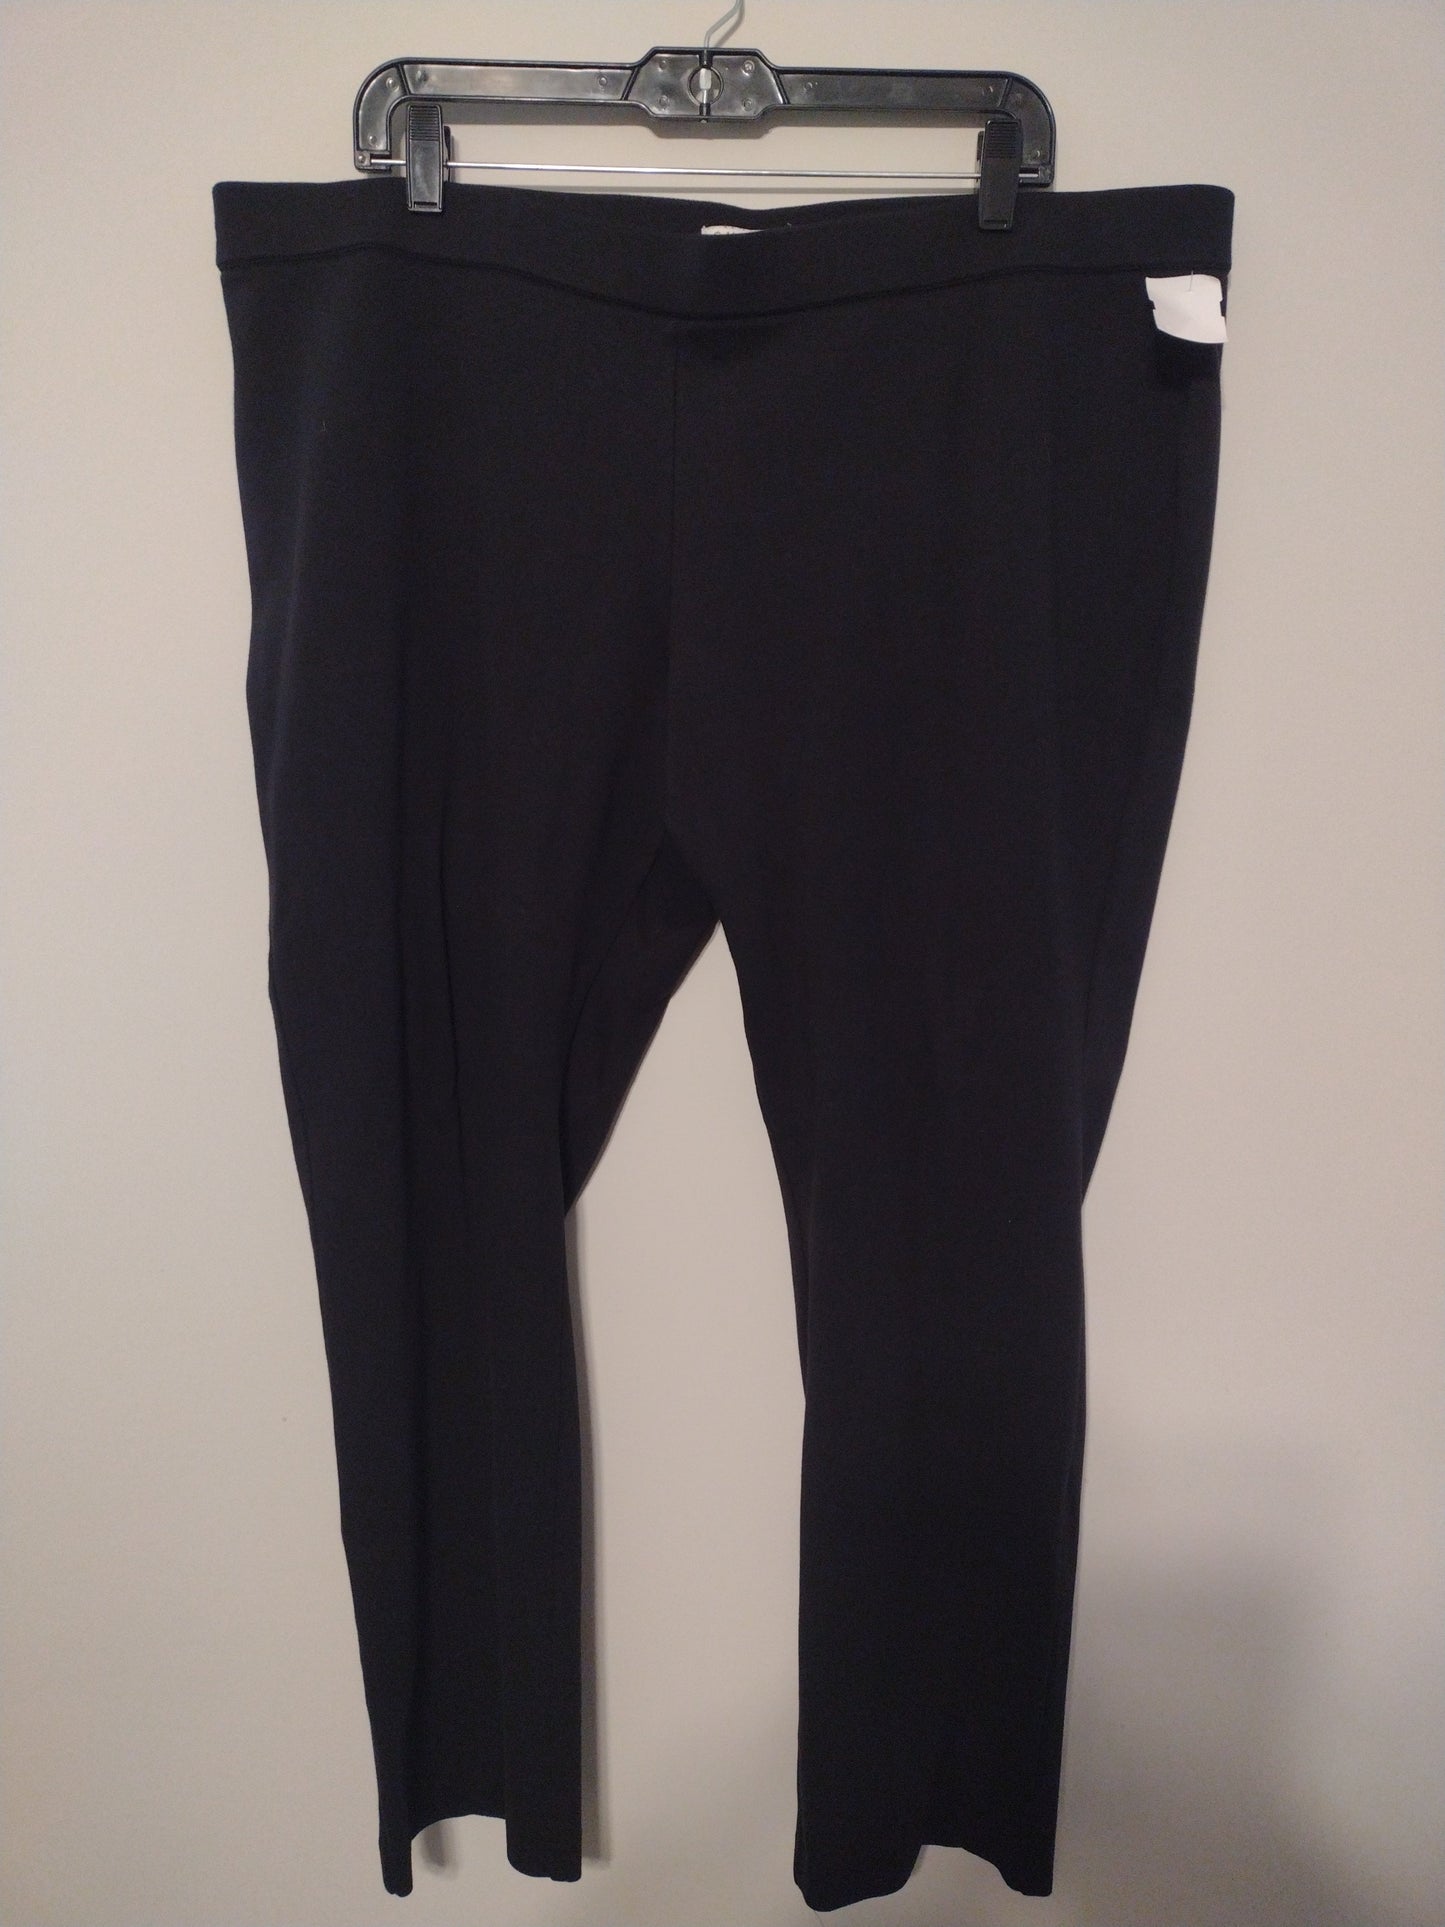 Leggings By Coldwater Creek  Size: 2x